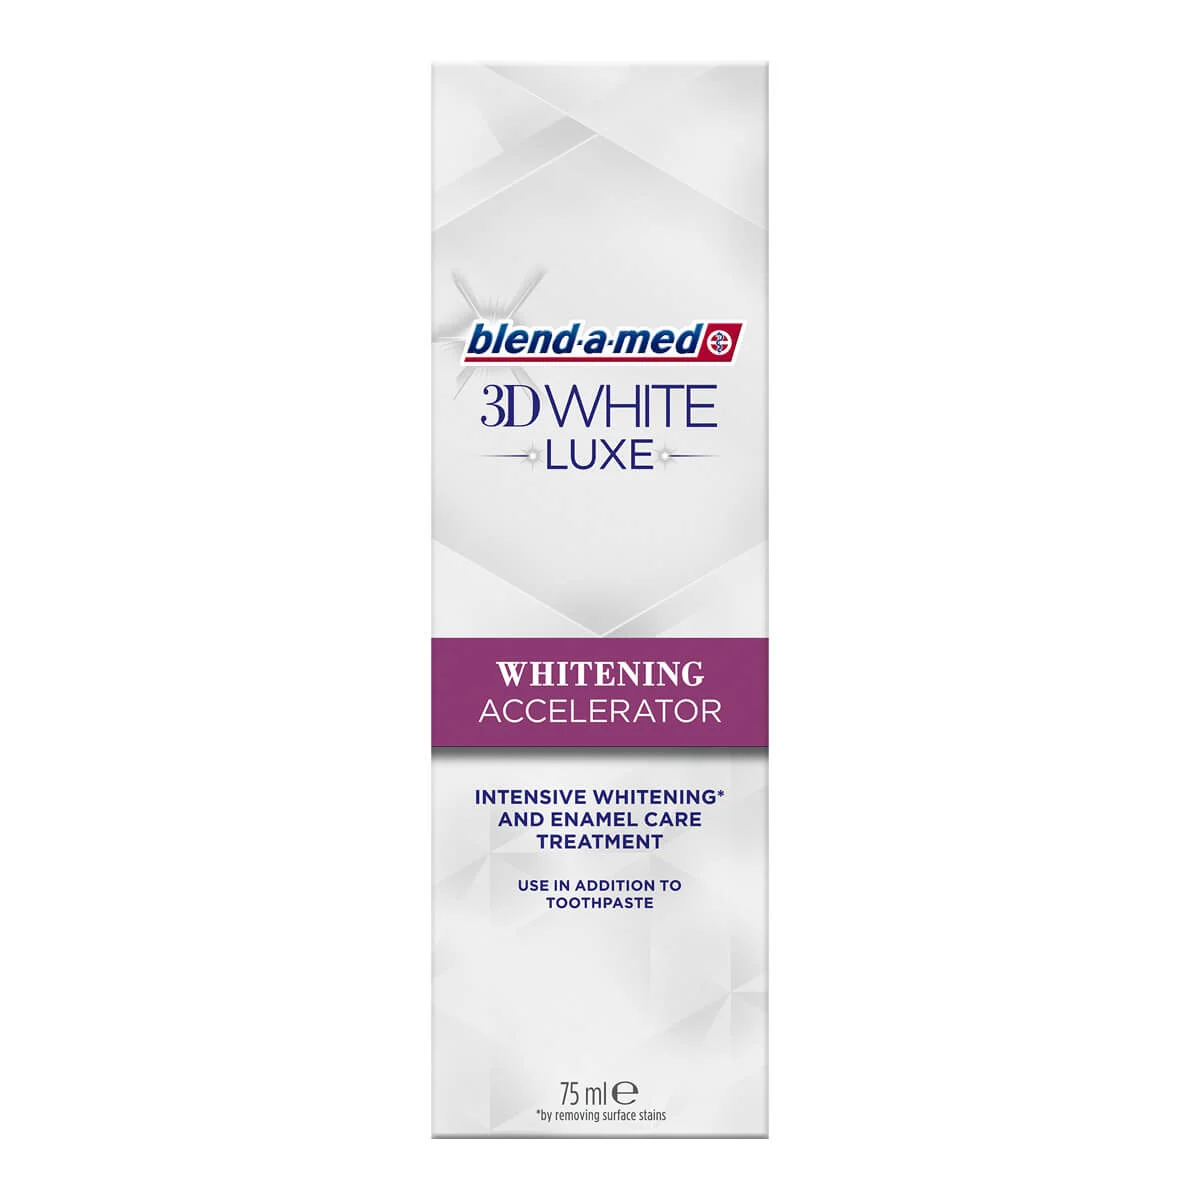 Blend-a-med 3DWhite Luxe Whitening Accelerator Treatment 